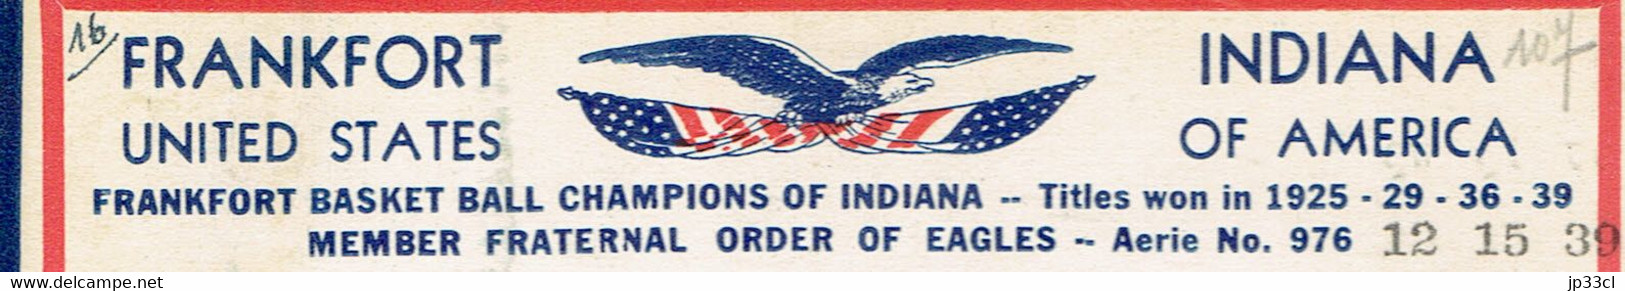 Basket Ball : Vintage Card From Frankfort (Champions Of Indiana 1925 - 29 - 36 - 39) - Basket-ball